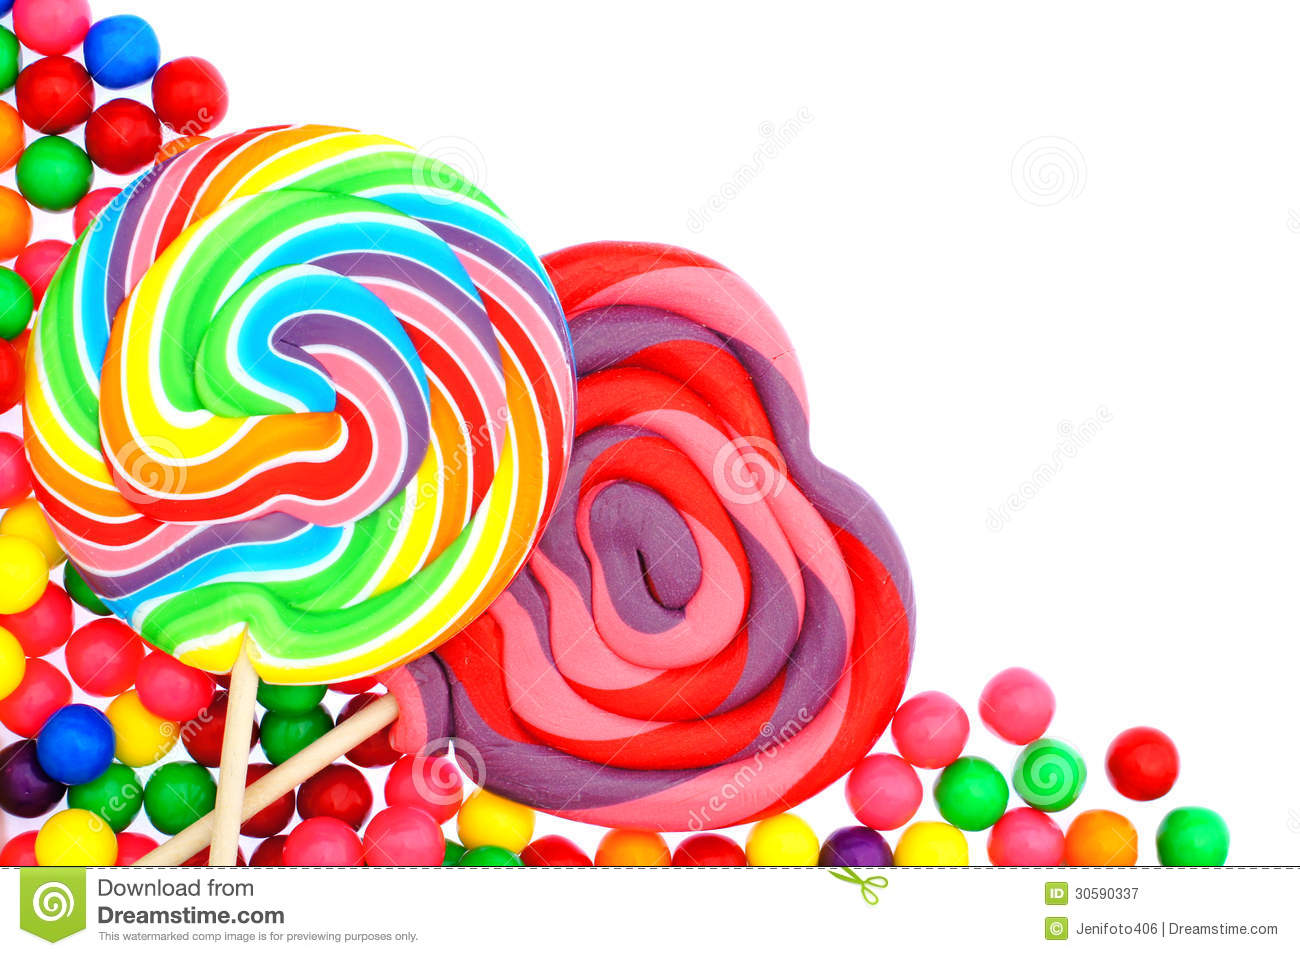 Colorful Candy Corner Border With Lollipops And Gumballs